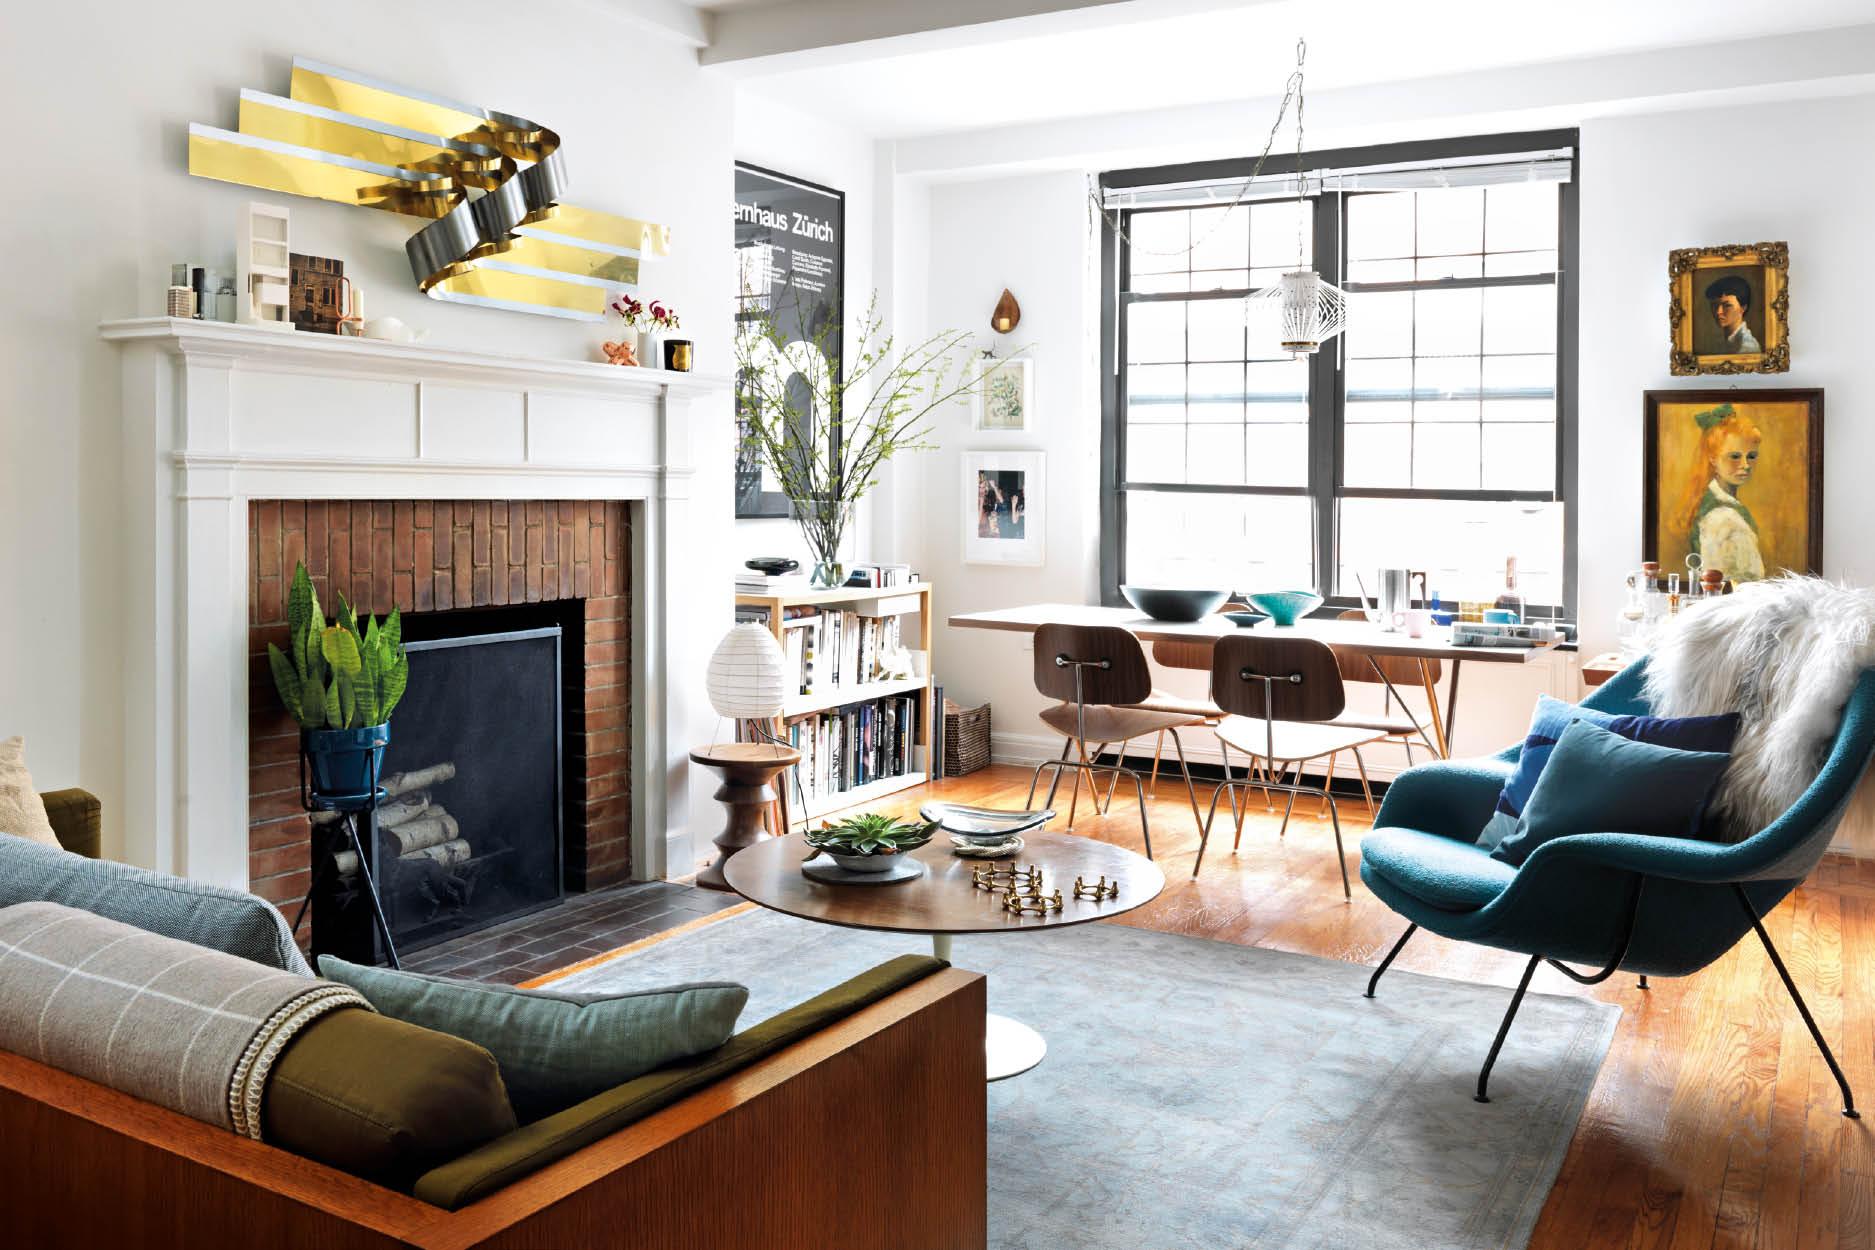 Step Inside a Spontaneous Yet Well-Planned 750sqft Home in New York